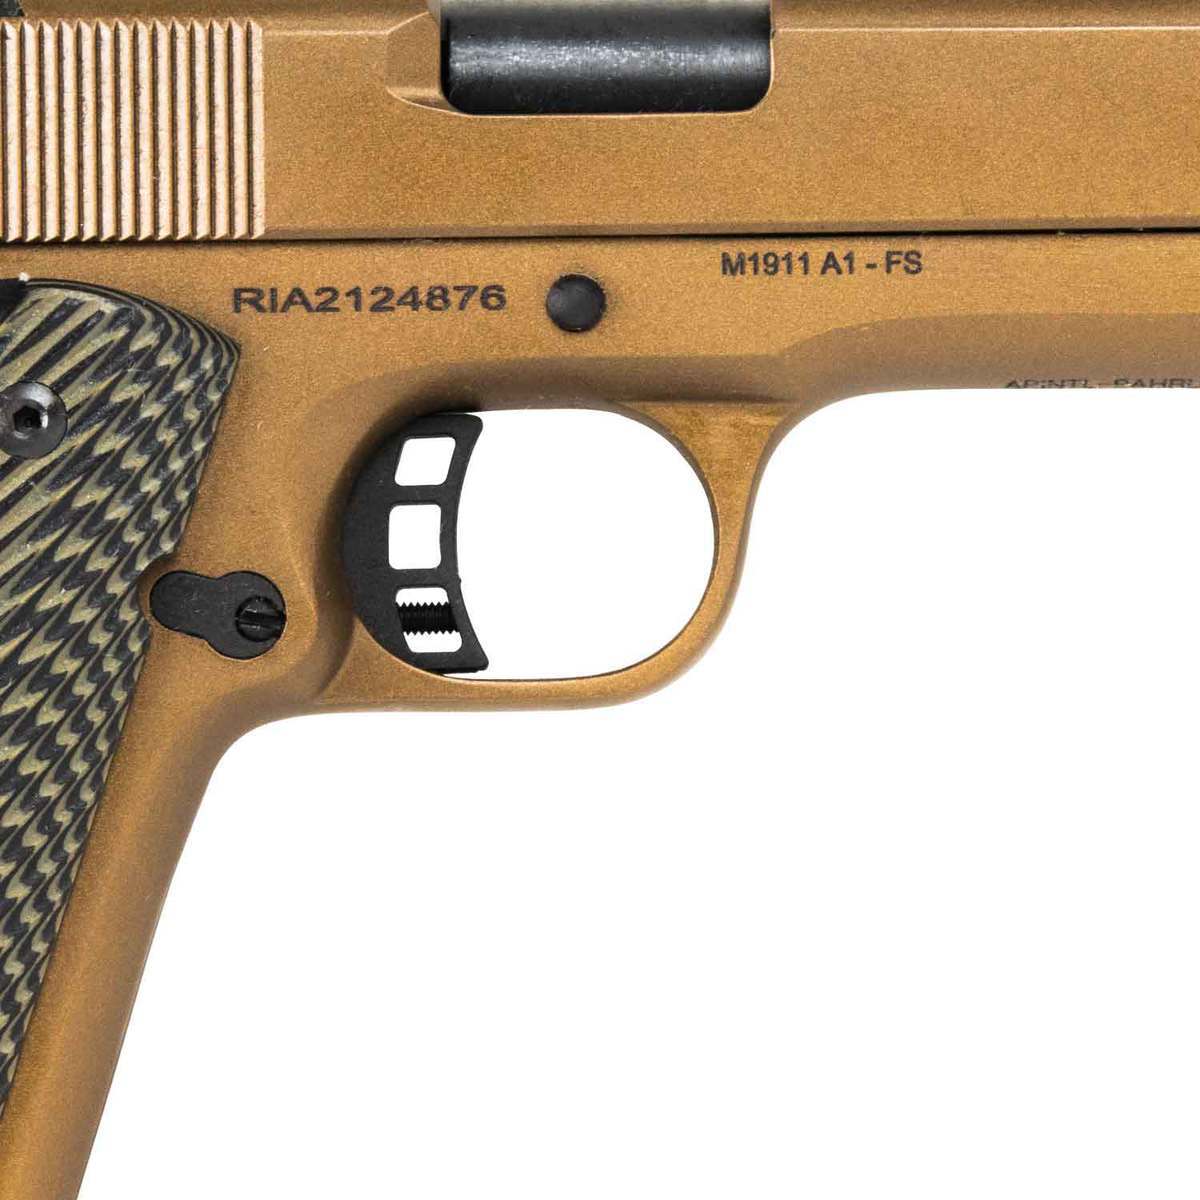 Rock Island Armory M1911 A1 Fs Tactical 45 Auto Acp 5in Burnt Bronzegreen Pistol 81 Rounds 1672